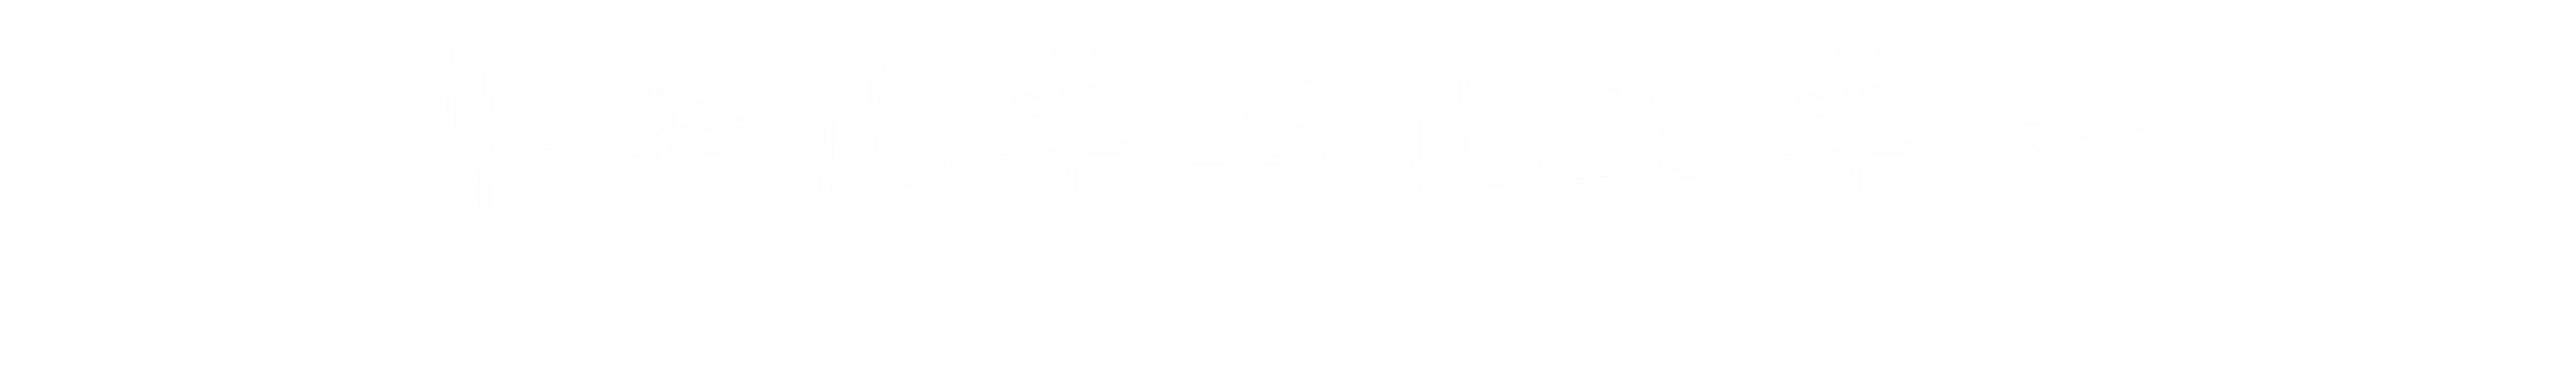 Chinese American Chemical Society - the Great Lakes Chapter